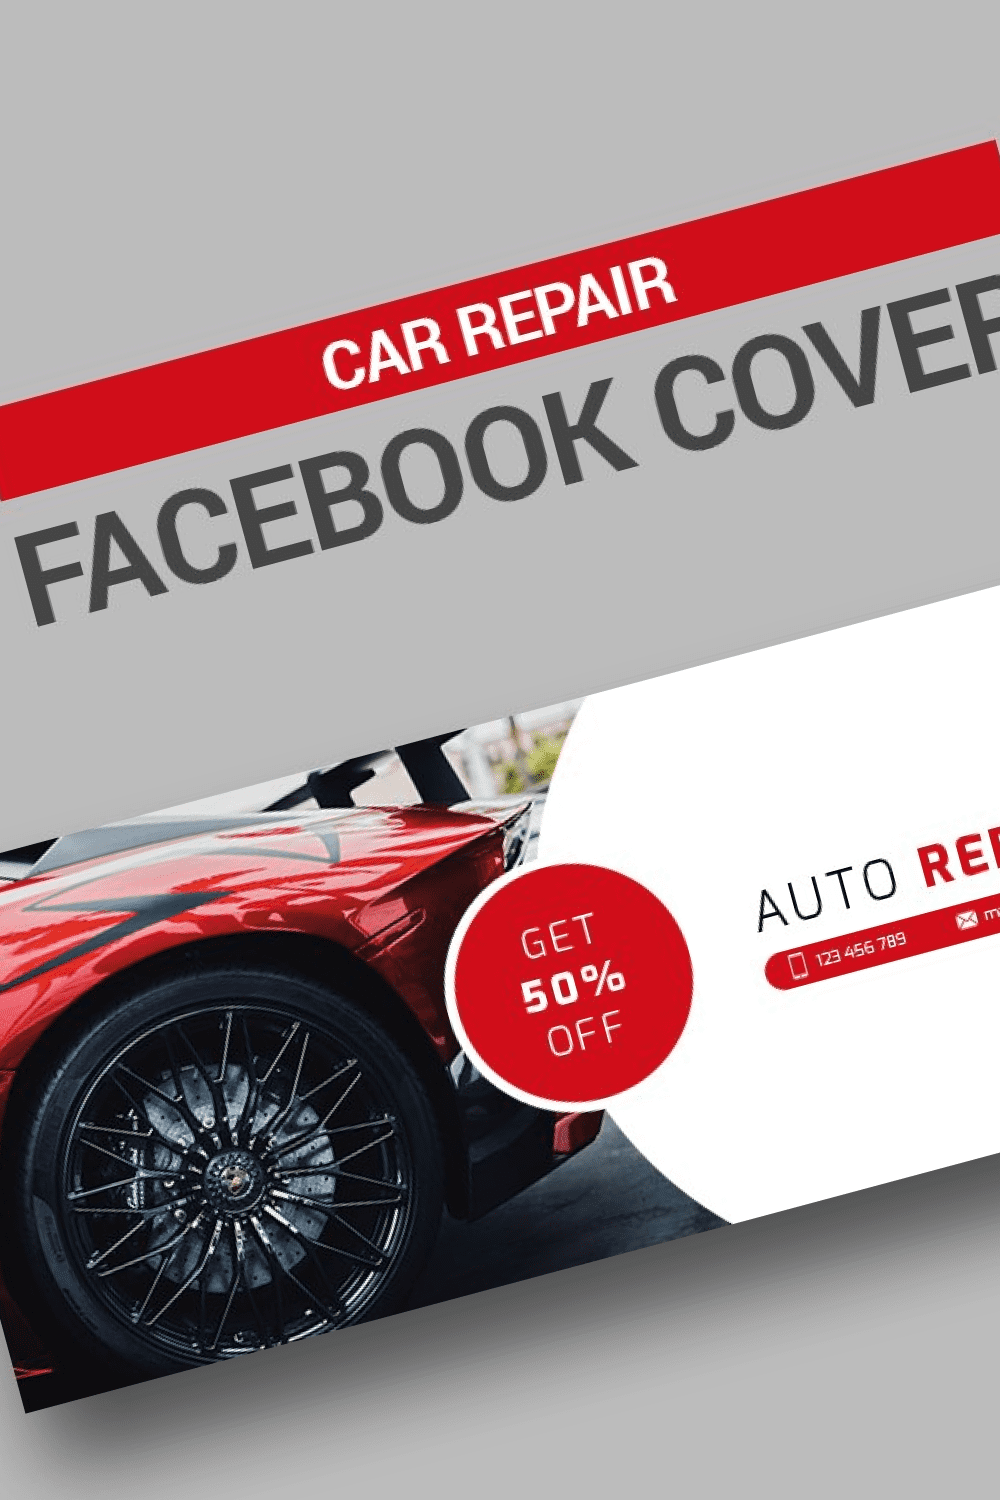 Template with stylish car repair facebook covers.